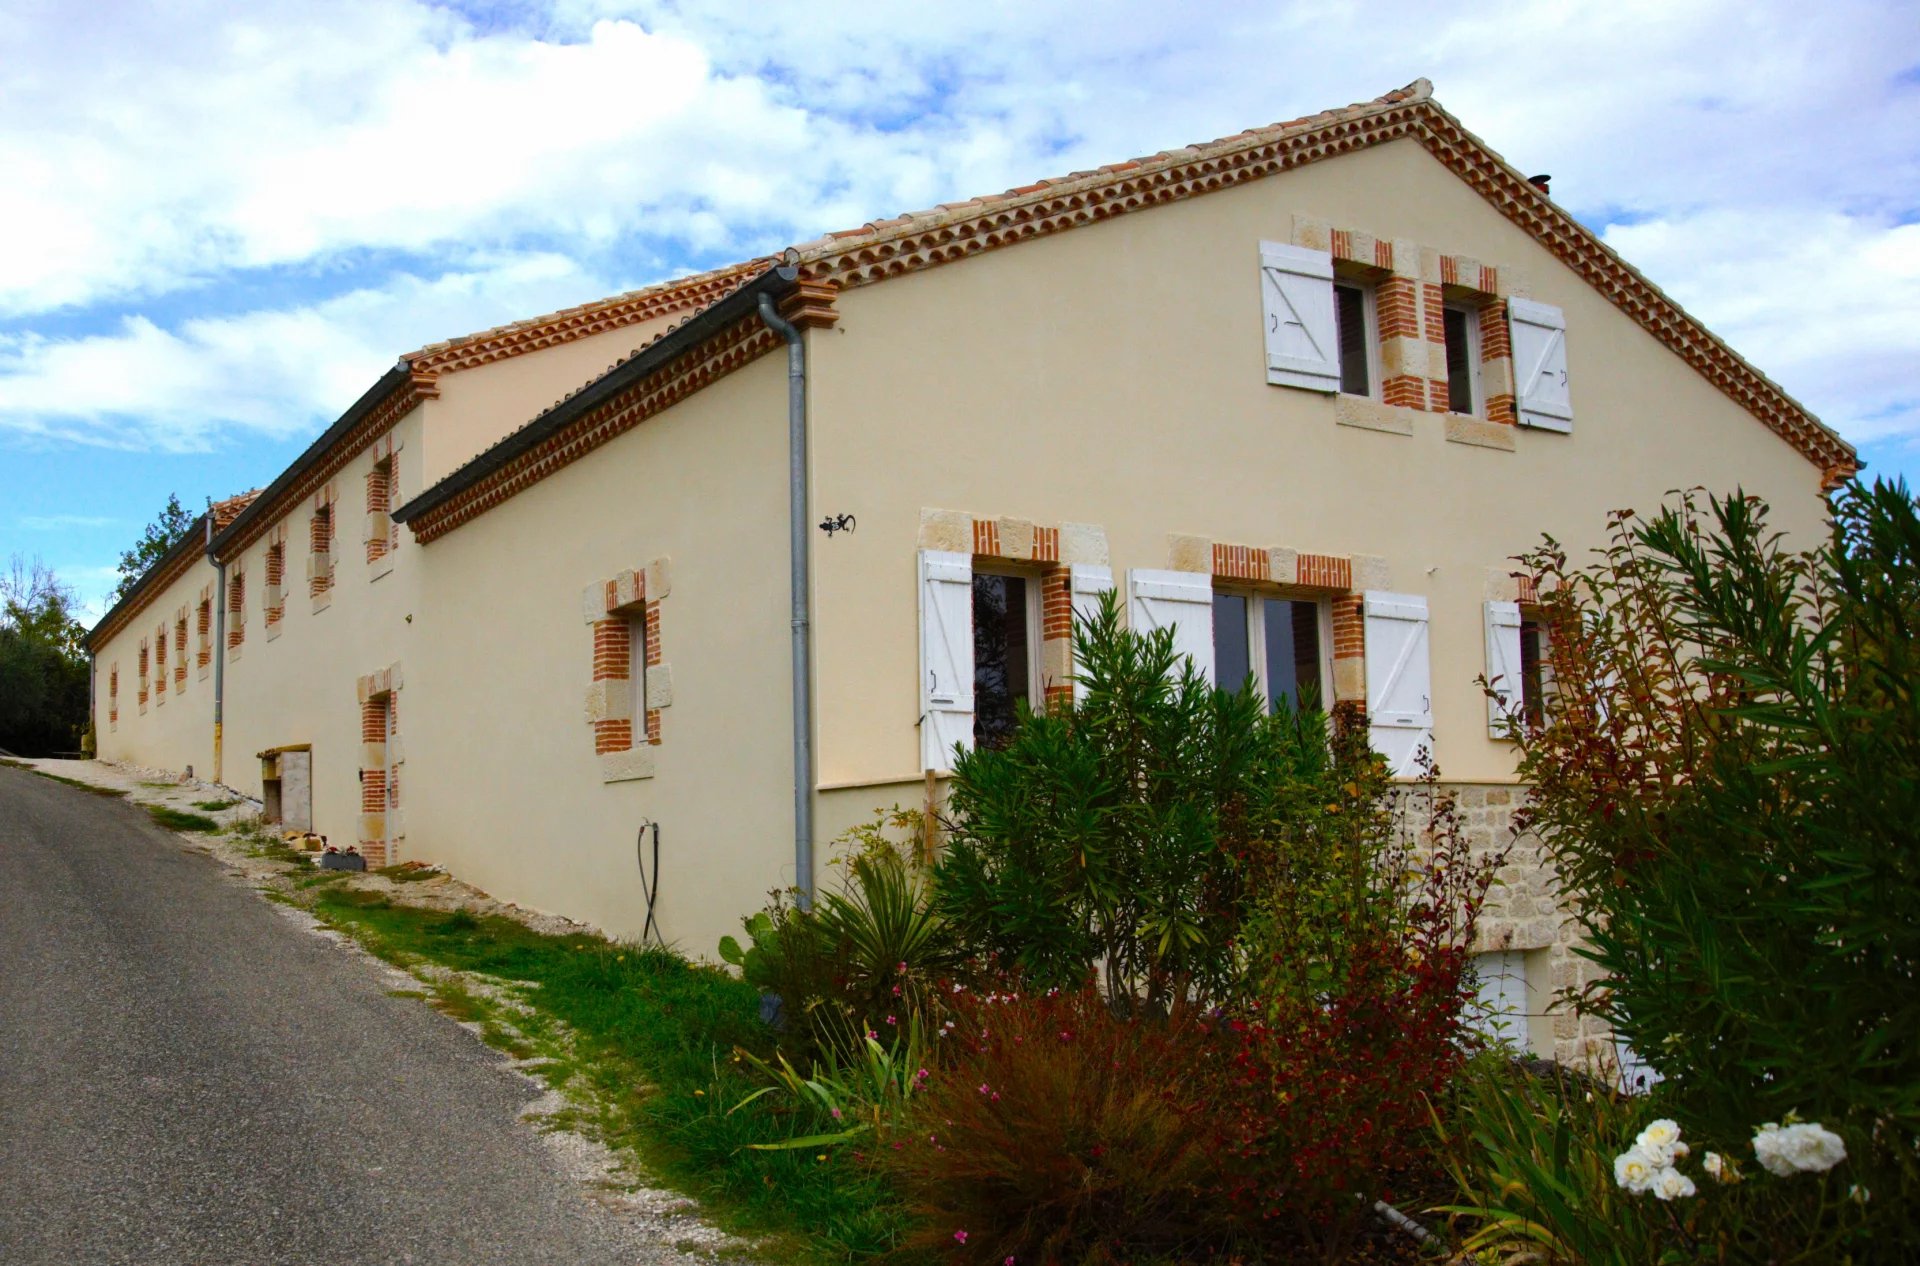 Bed and Breakfast property on the Saint-Jacques de Compostelle pilgrimage road in Lauzerte